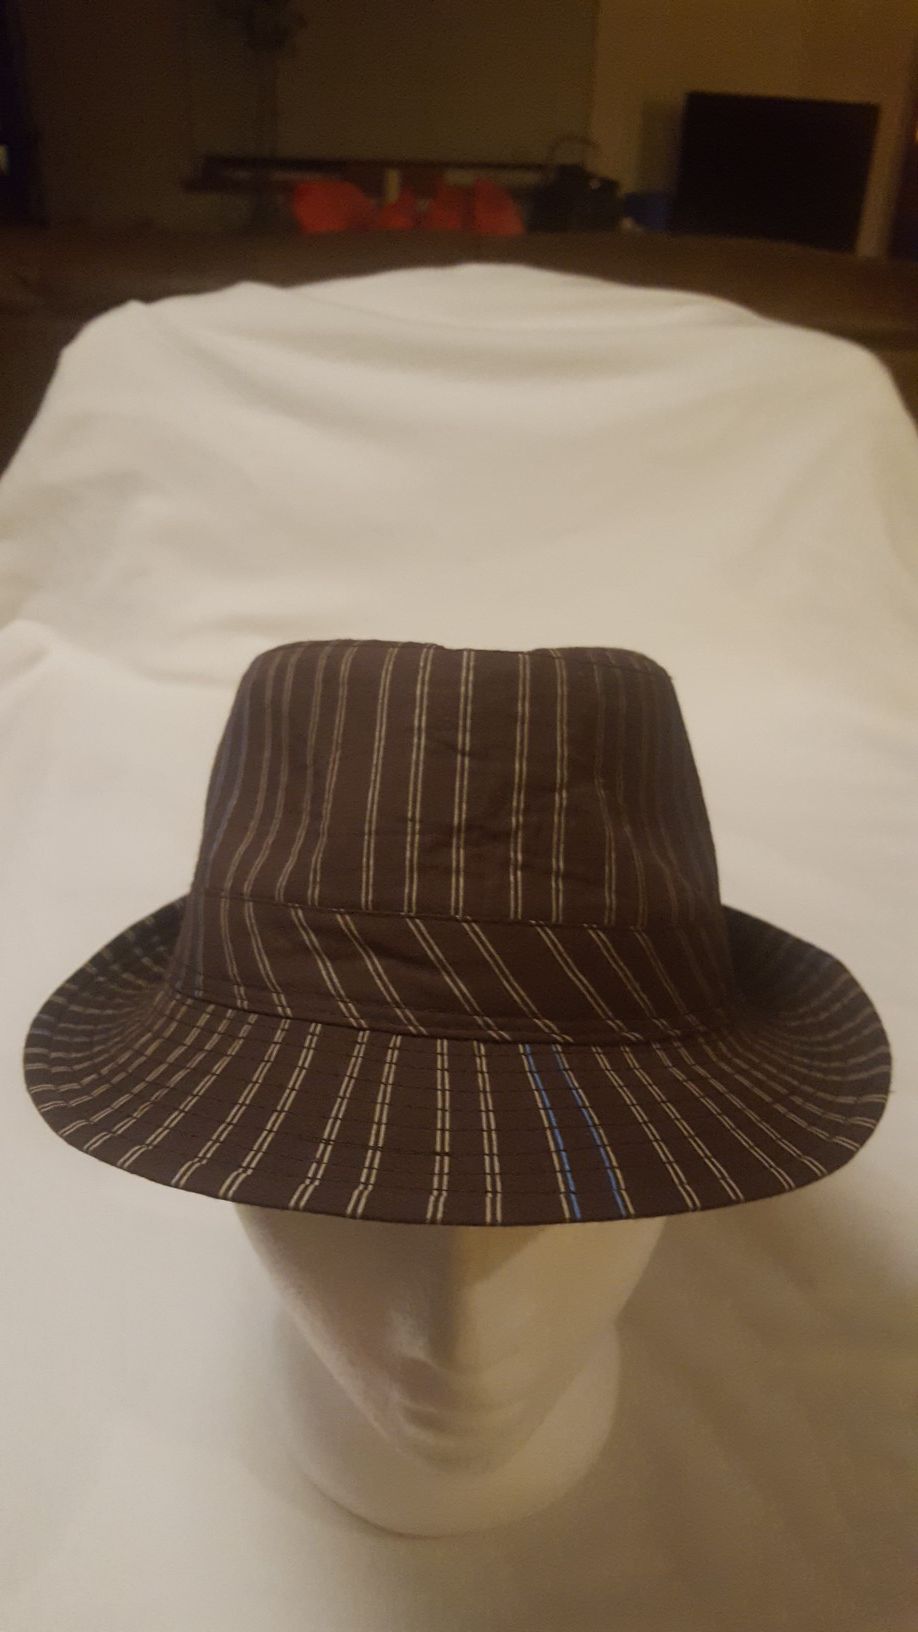 Billabong fedora hat brown with stripes size small medium